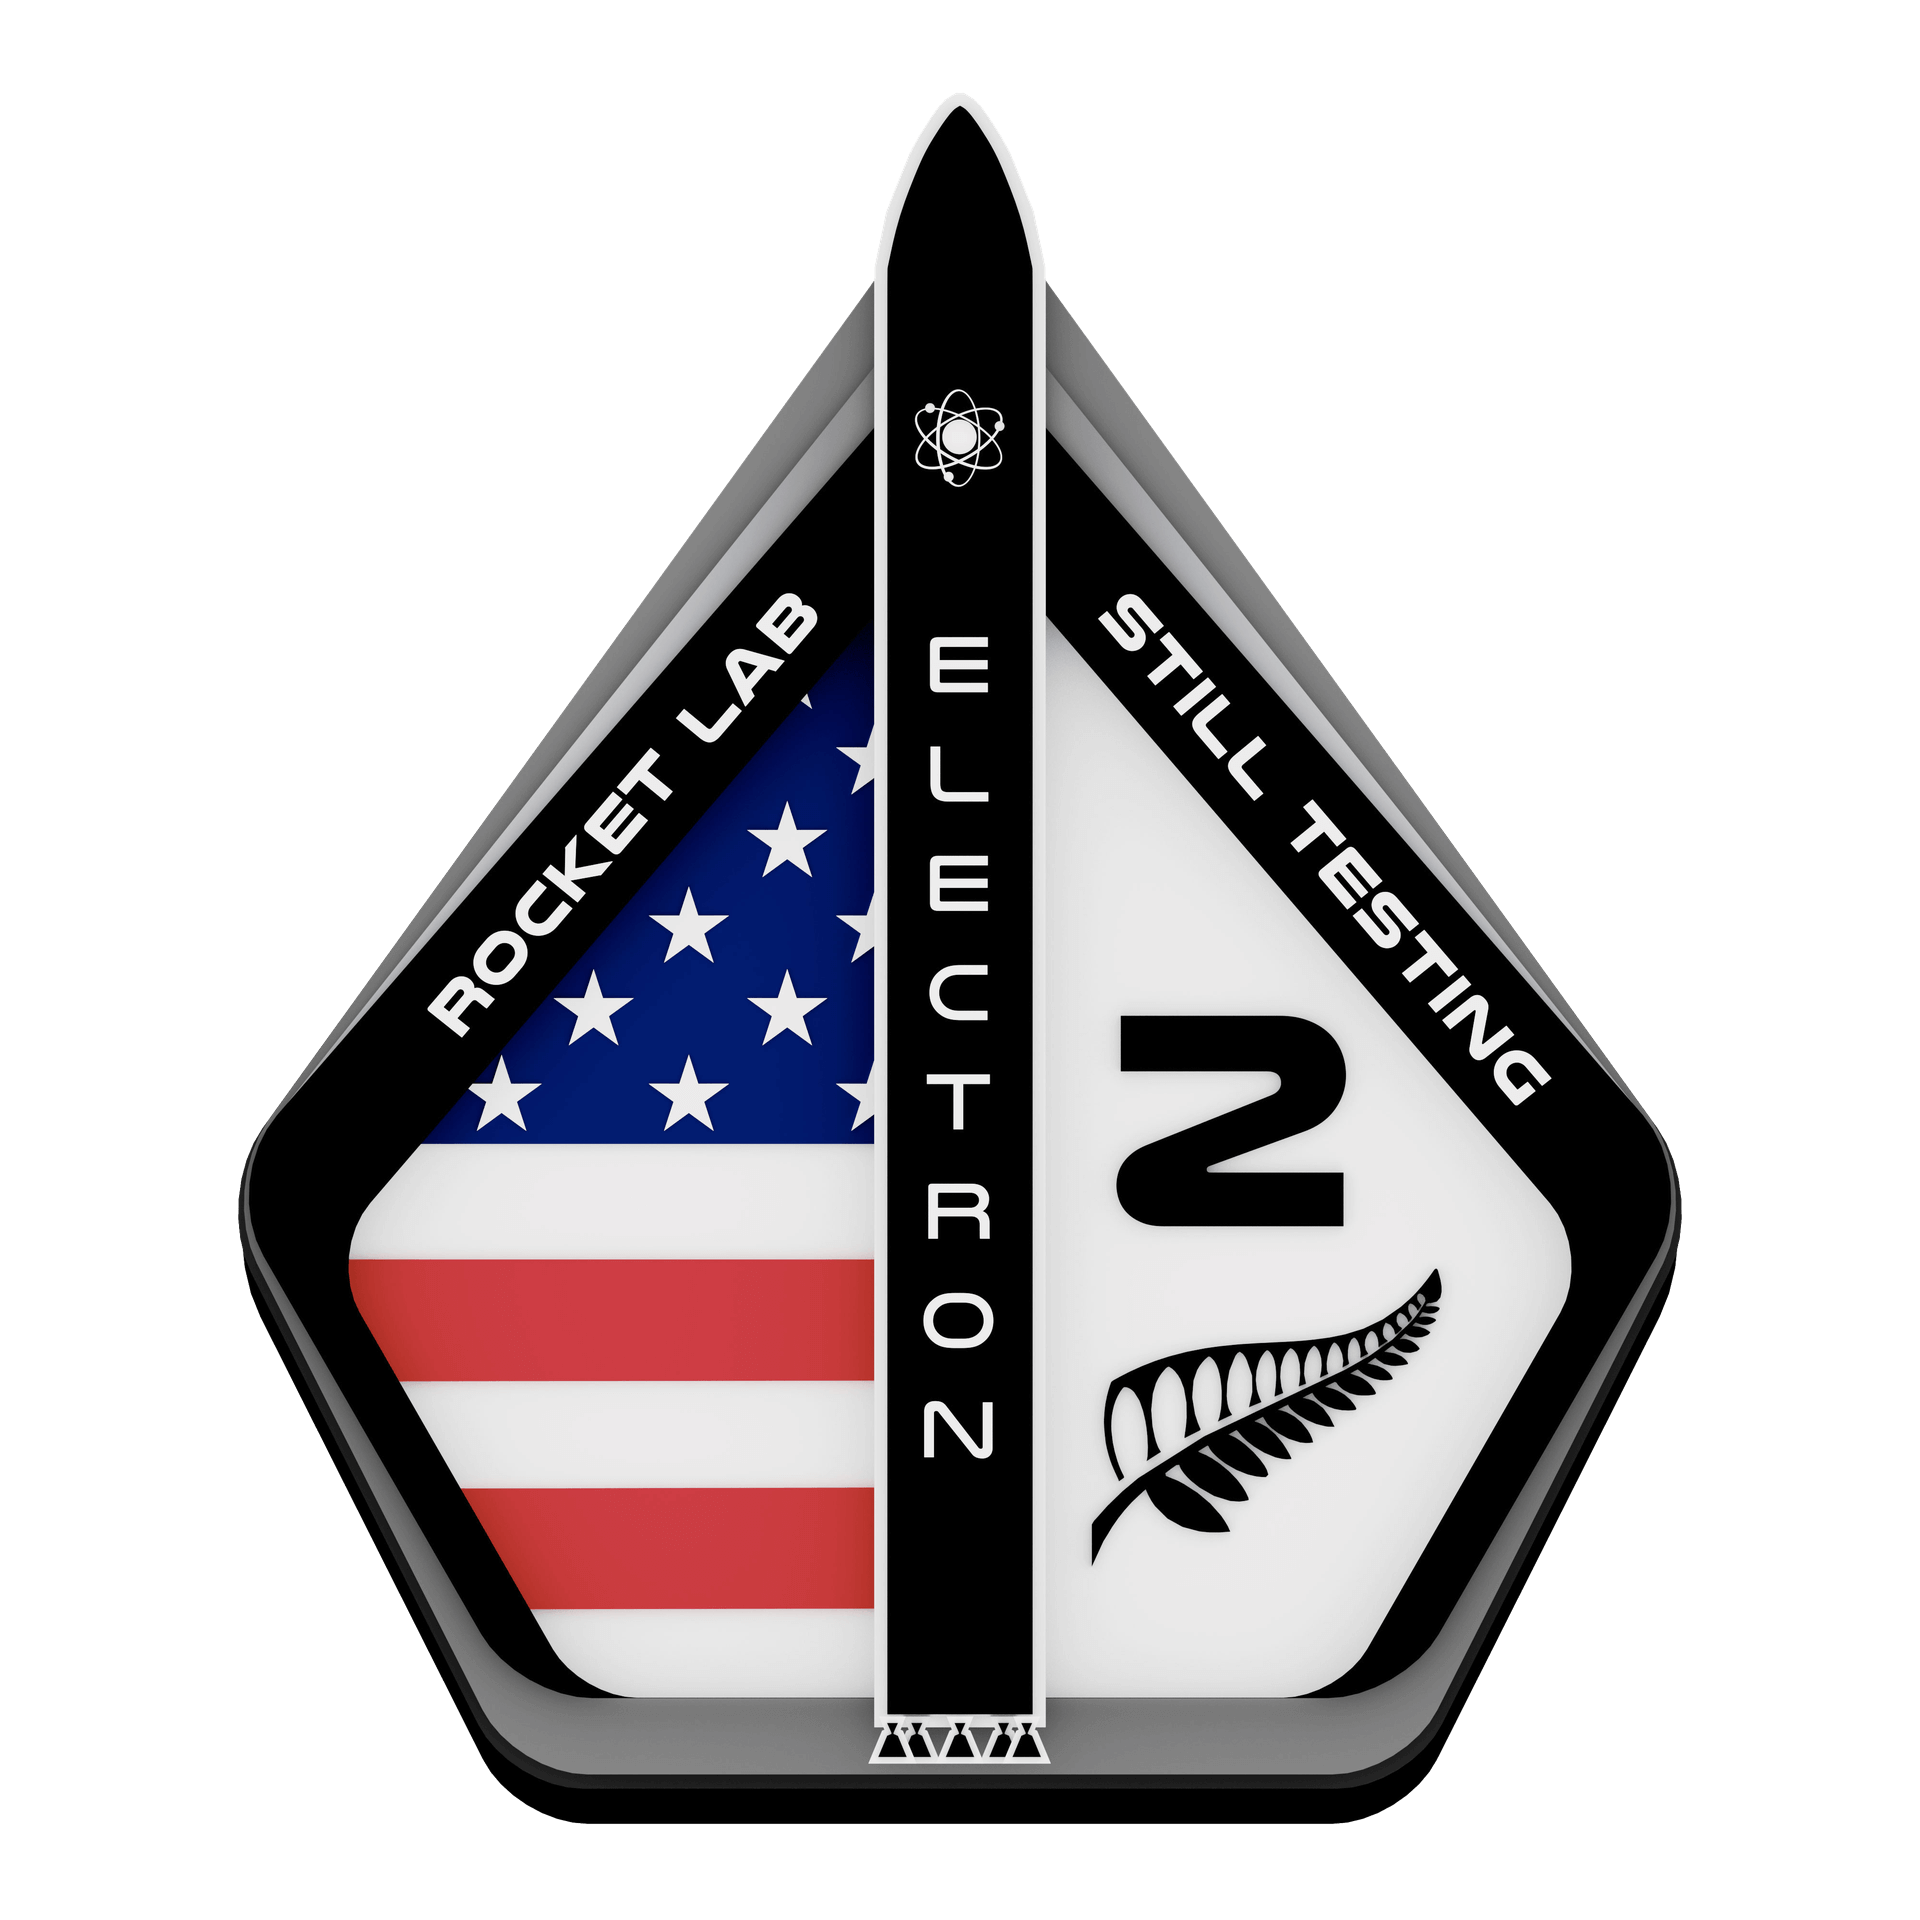 Mission patch for Still Testing (Dove Pioneer, 2 x Lemur-2)